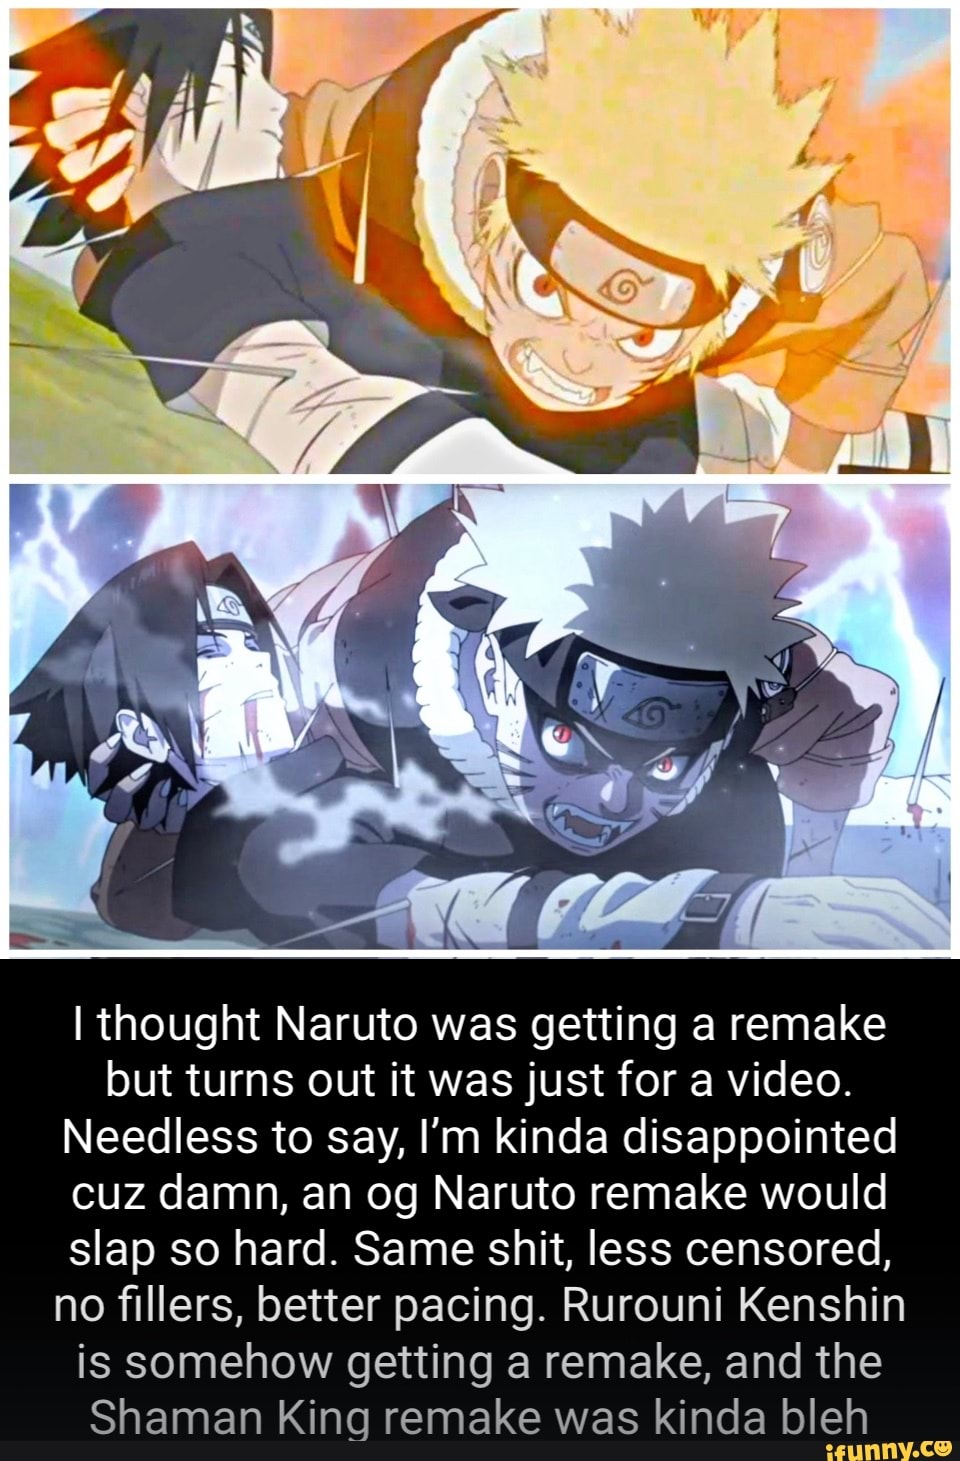 Naruto Shippuden Kai (what if they remade the show with all filler